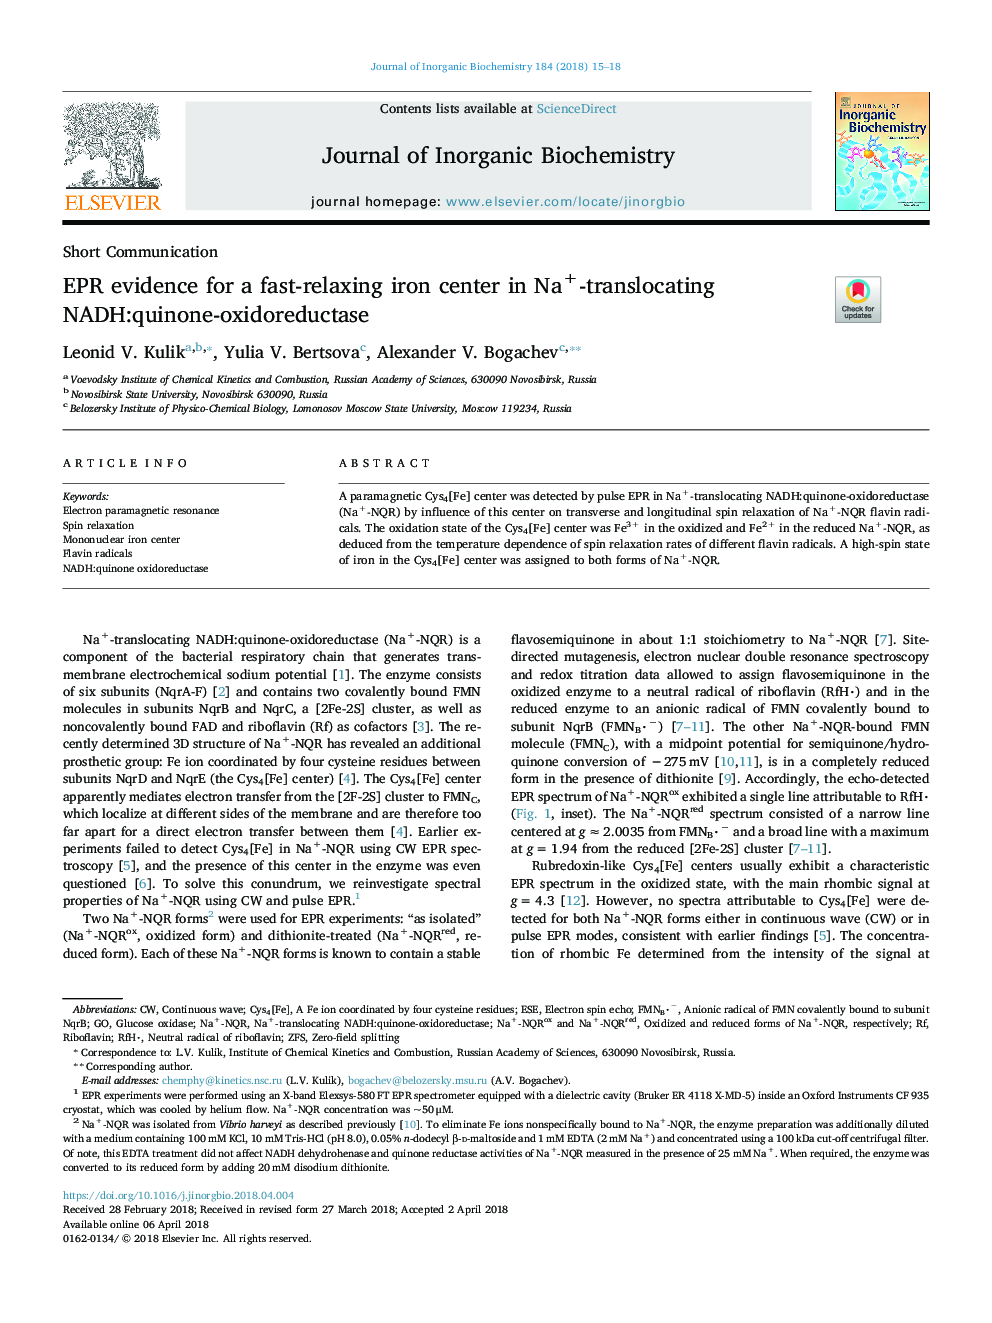 EPR evidence for a fast-relaxing iron center in Na+-translocating NADH:quinone-oxidoreductase